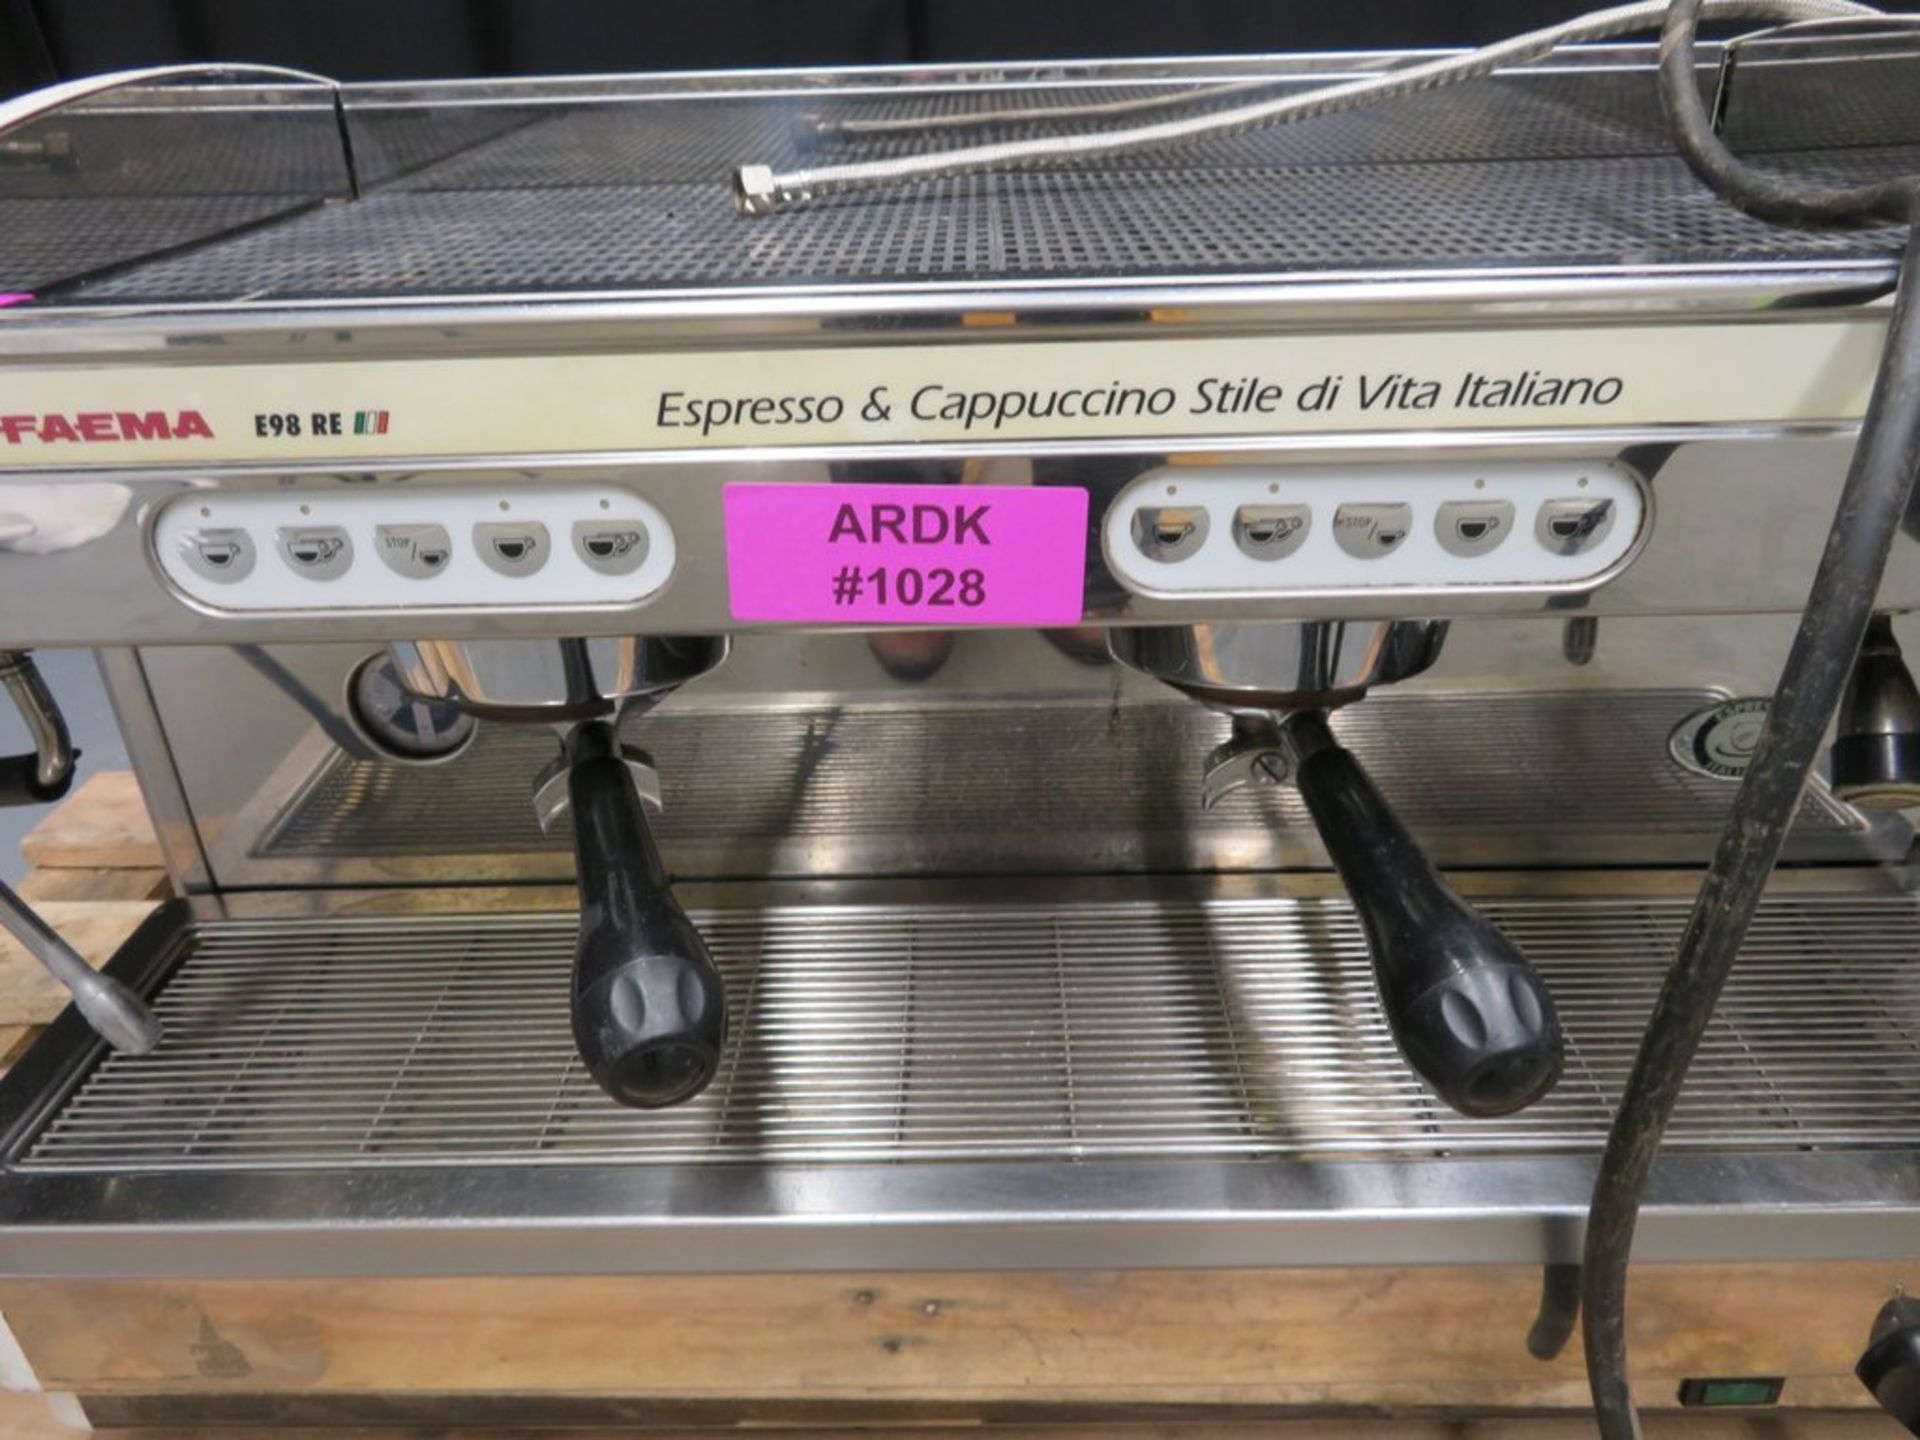 Faema E98 RE coffee machine, 1 phase electric, missing 1 dial - Image 5 of 10